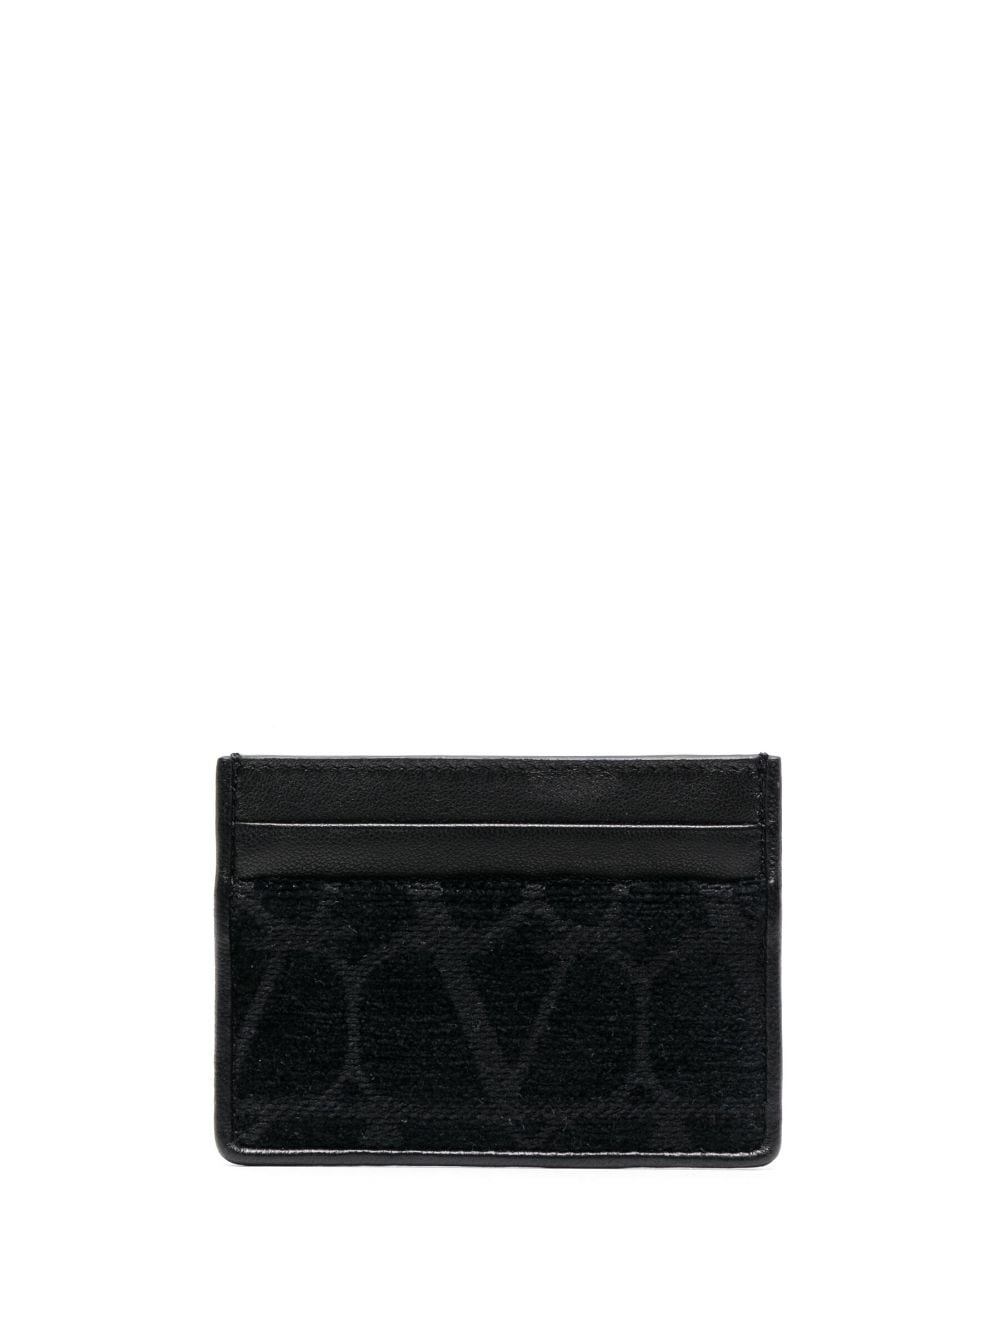 Card holder with logo - 1